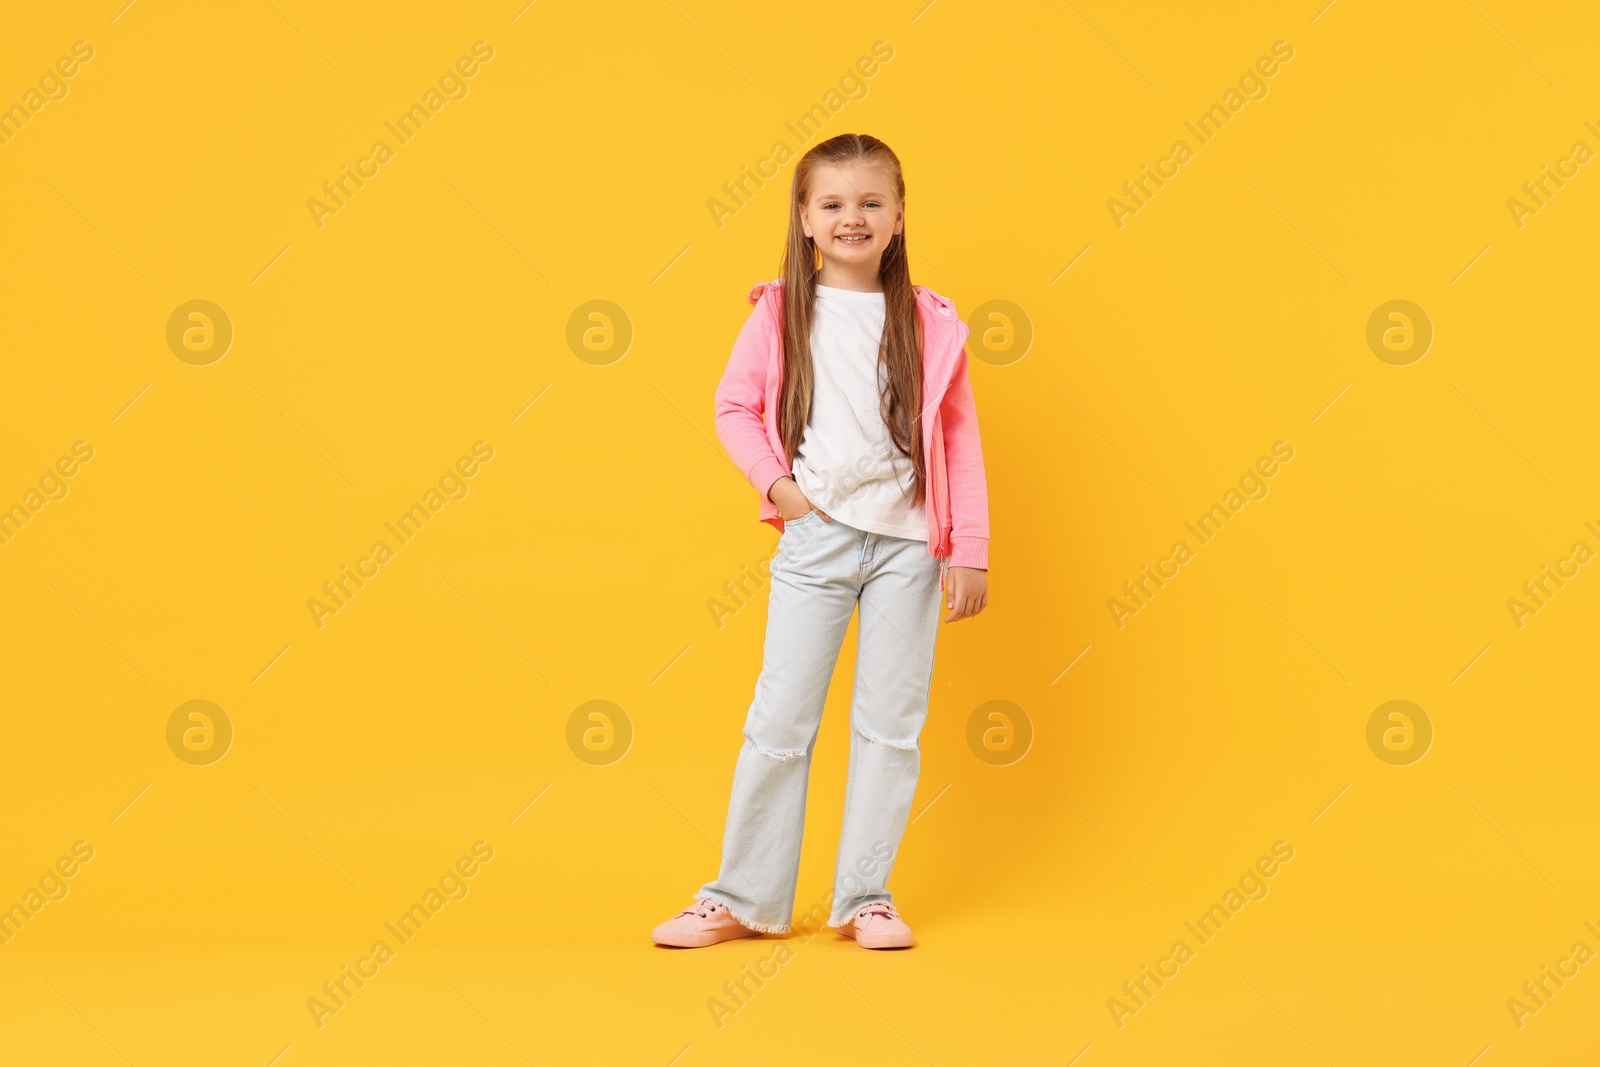 Photo of Cute little dancer posing on yellow background